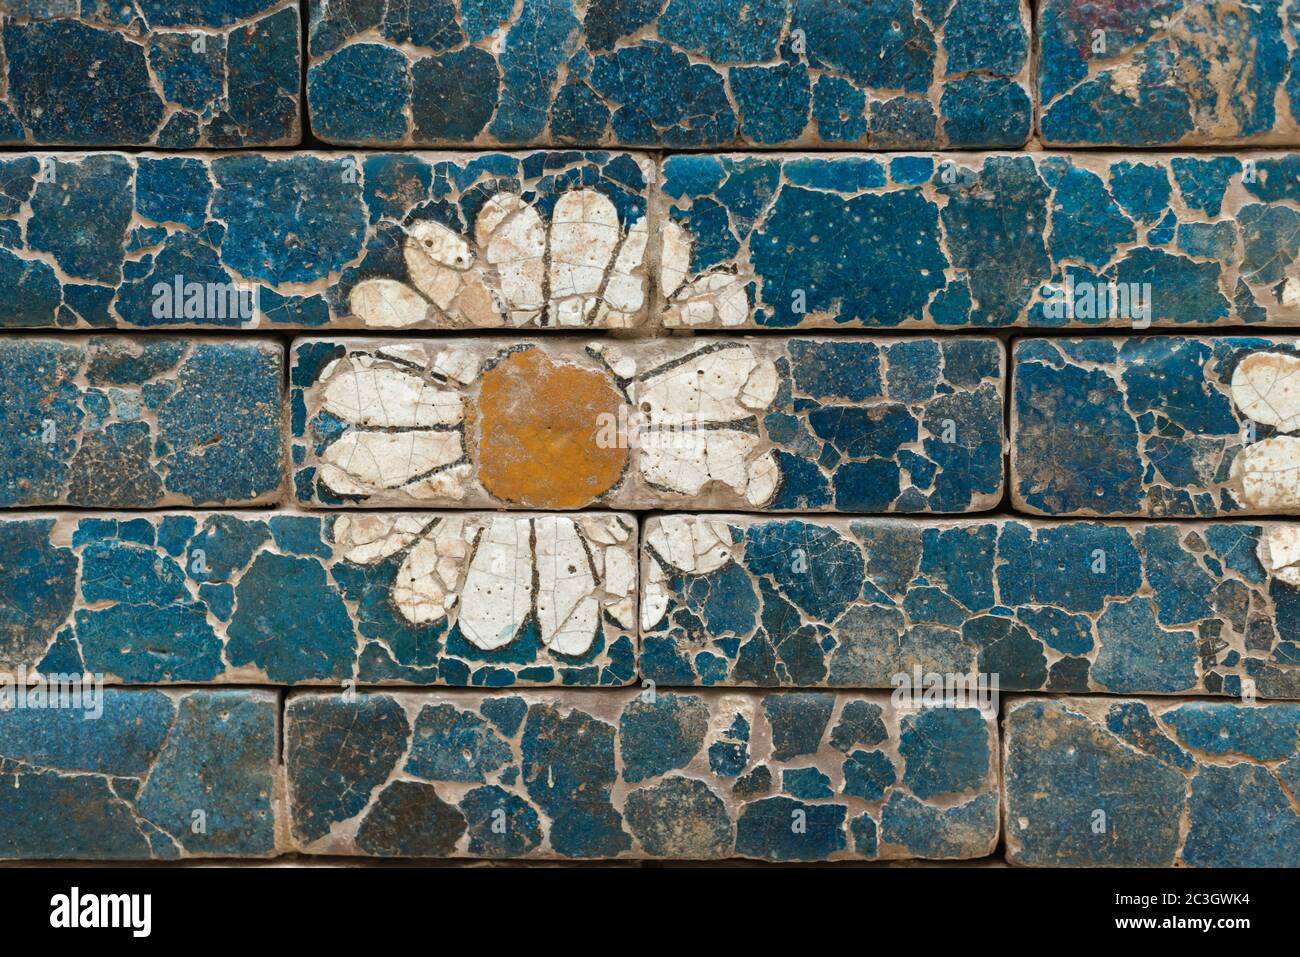 damaged brick wall with simple flower image from ancient Babylon Stock Photo